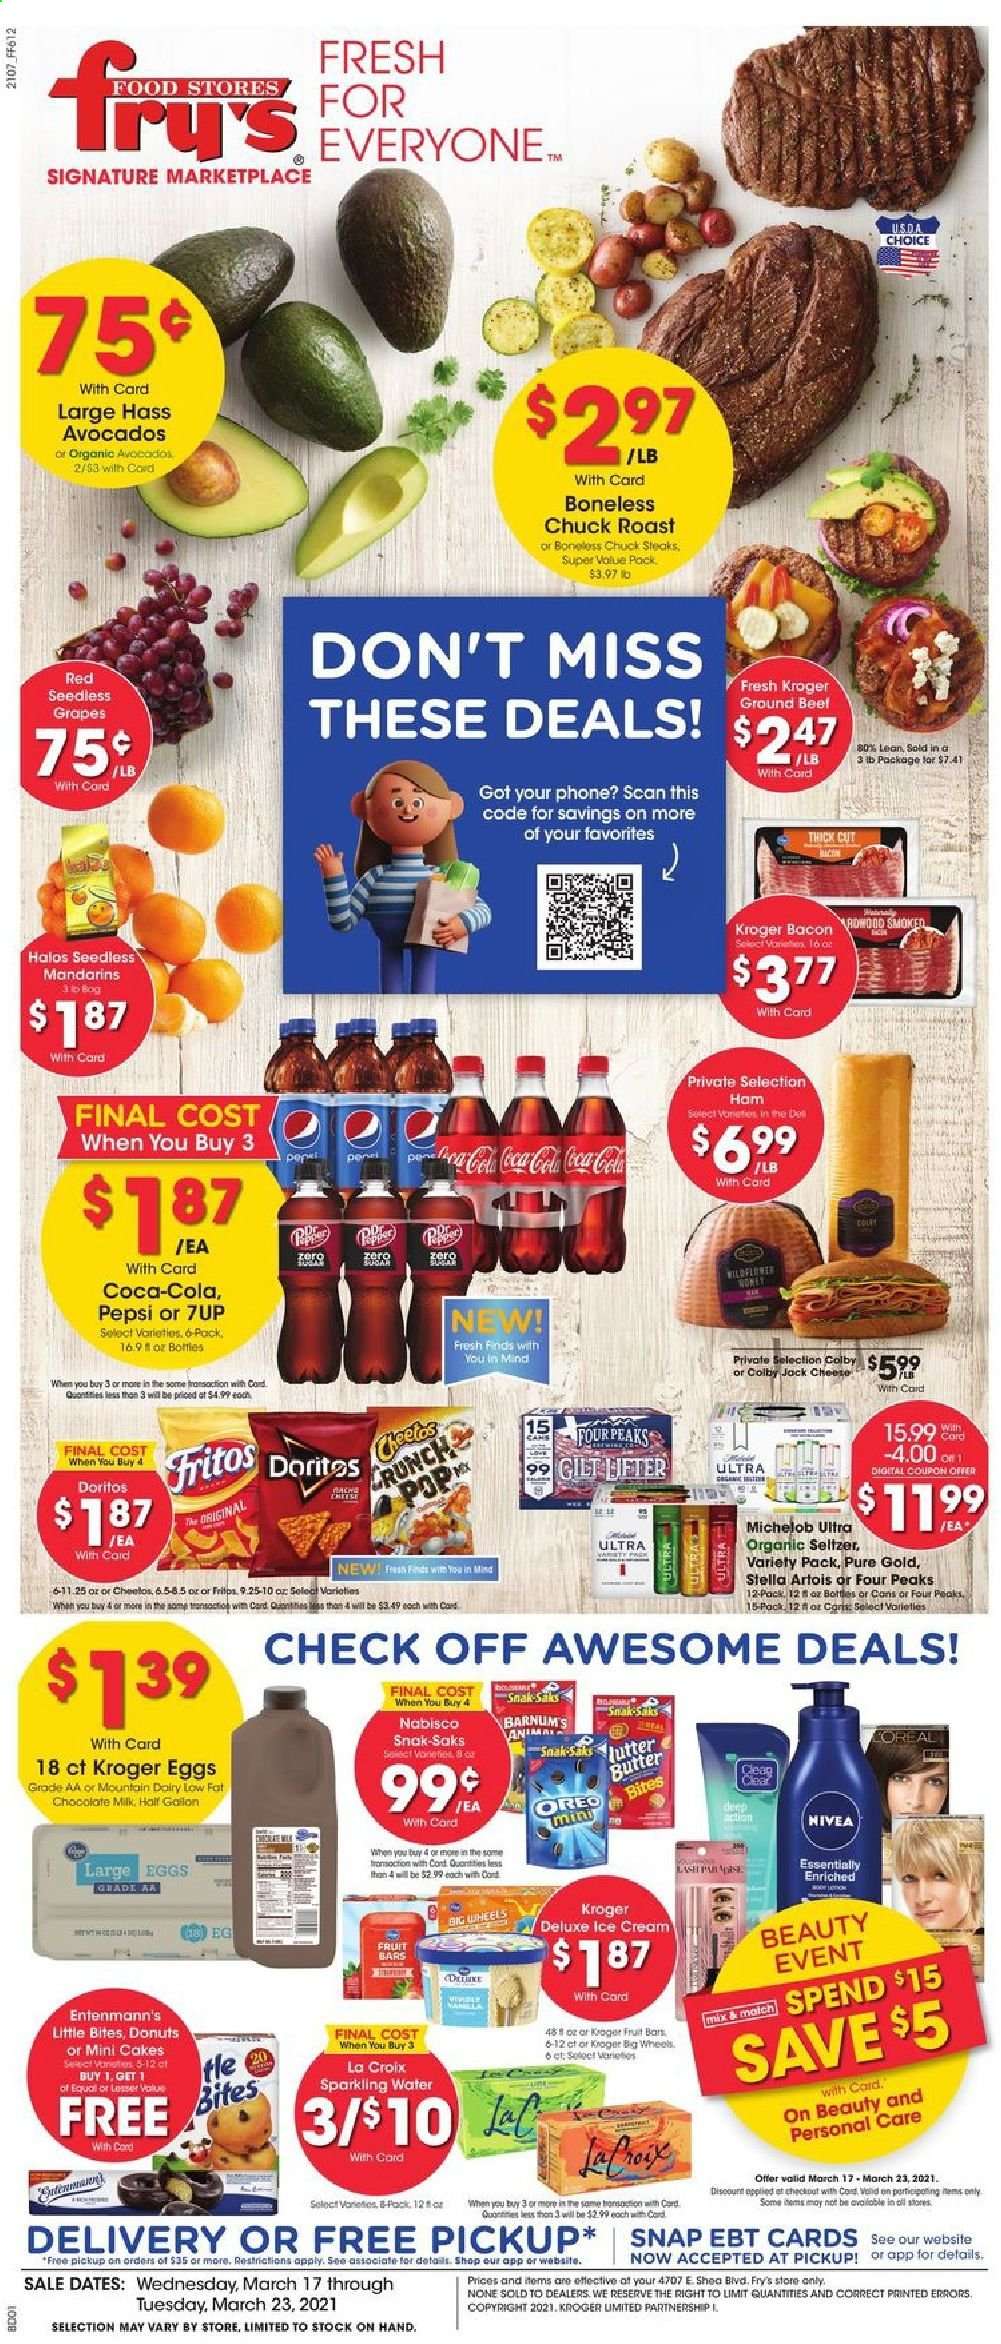 thumbnail - Fry’s Flyer - 03/17/2021 - 03/23/2021 - Sales products - cake, donut, Entenmann's, Little Bites, bacon, ham, Colby cheese, cheese, Oreo, milk, large eggs, butter, ice cream, chocolate, Doritos, mandarines, Fritos, Coca-Cola, Pepsi, 7UP, seltzer water, sparkling water, beer, Stella Artois, Michelob, beef meat, ground beef, steak, chuck roast, Nivea. Page 1.